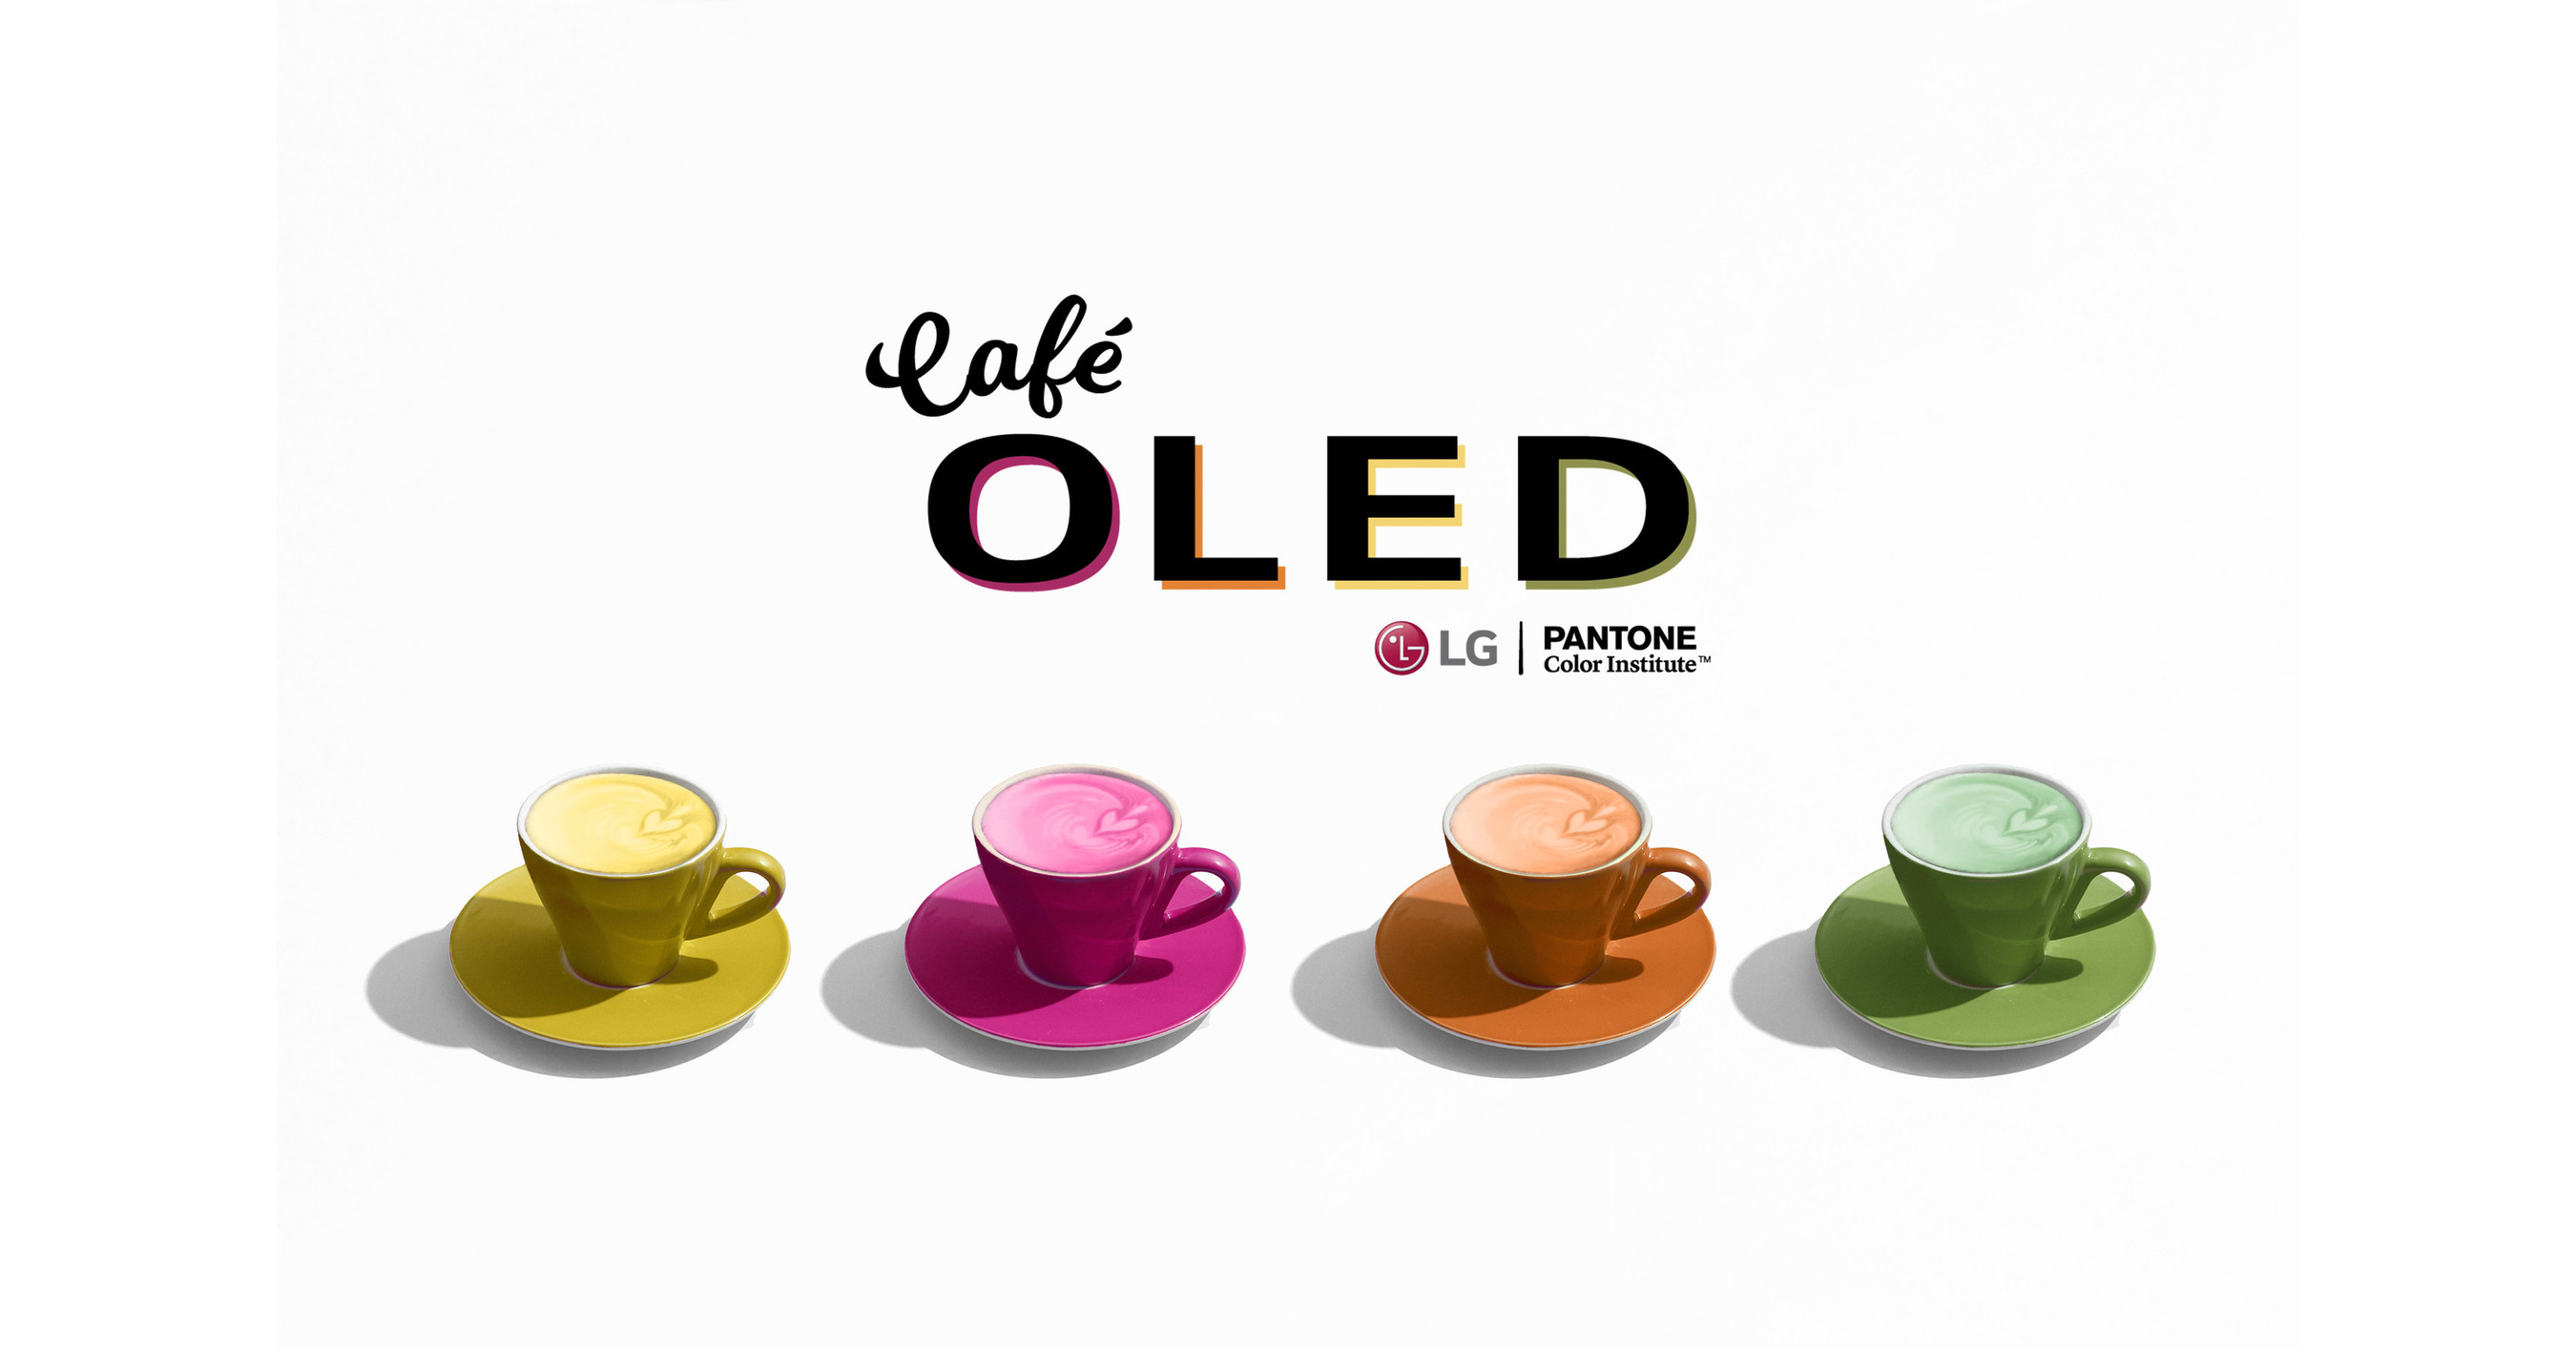 LG Electronics And Pantone Color Institute Create Unique Color Experience  At Café OLED